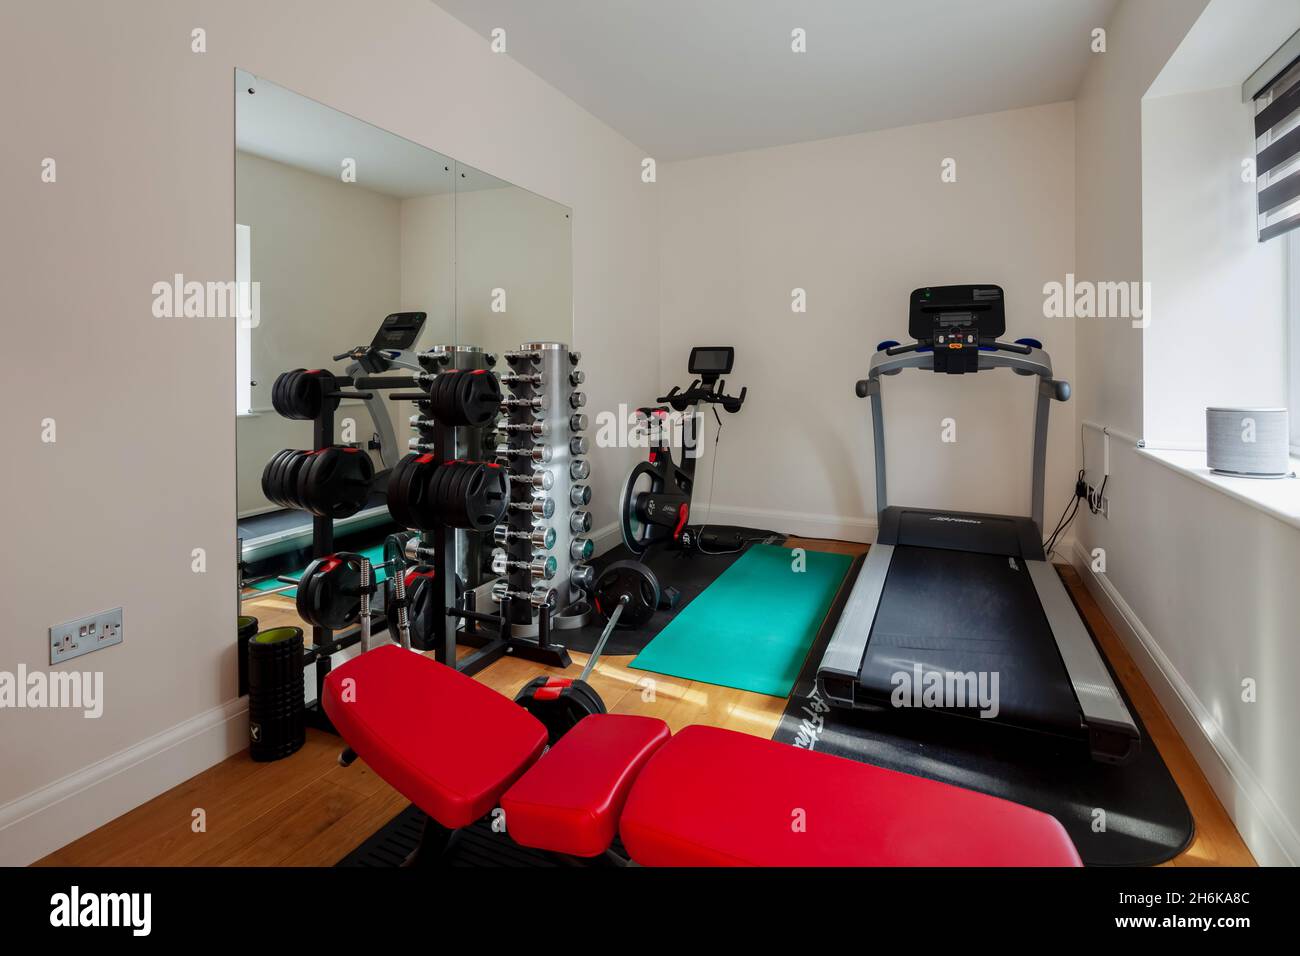 Essex, England - November 18 2019: Indoor domestic residential gymnasium inside home with weights, running machine, exercise bike and bench. Stock Photo